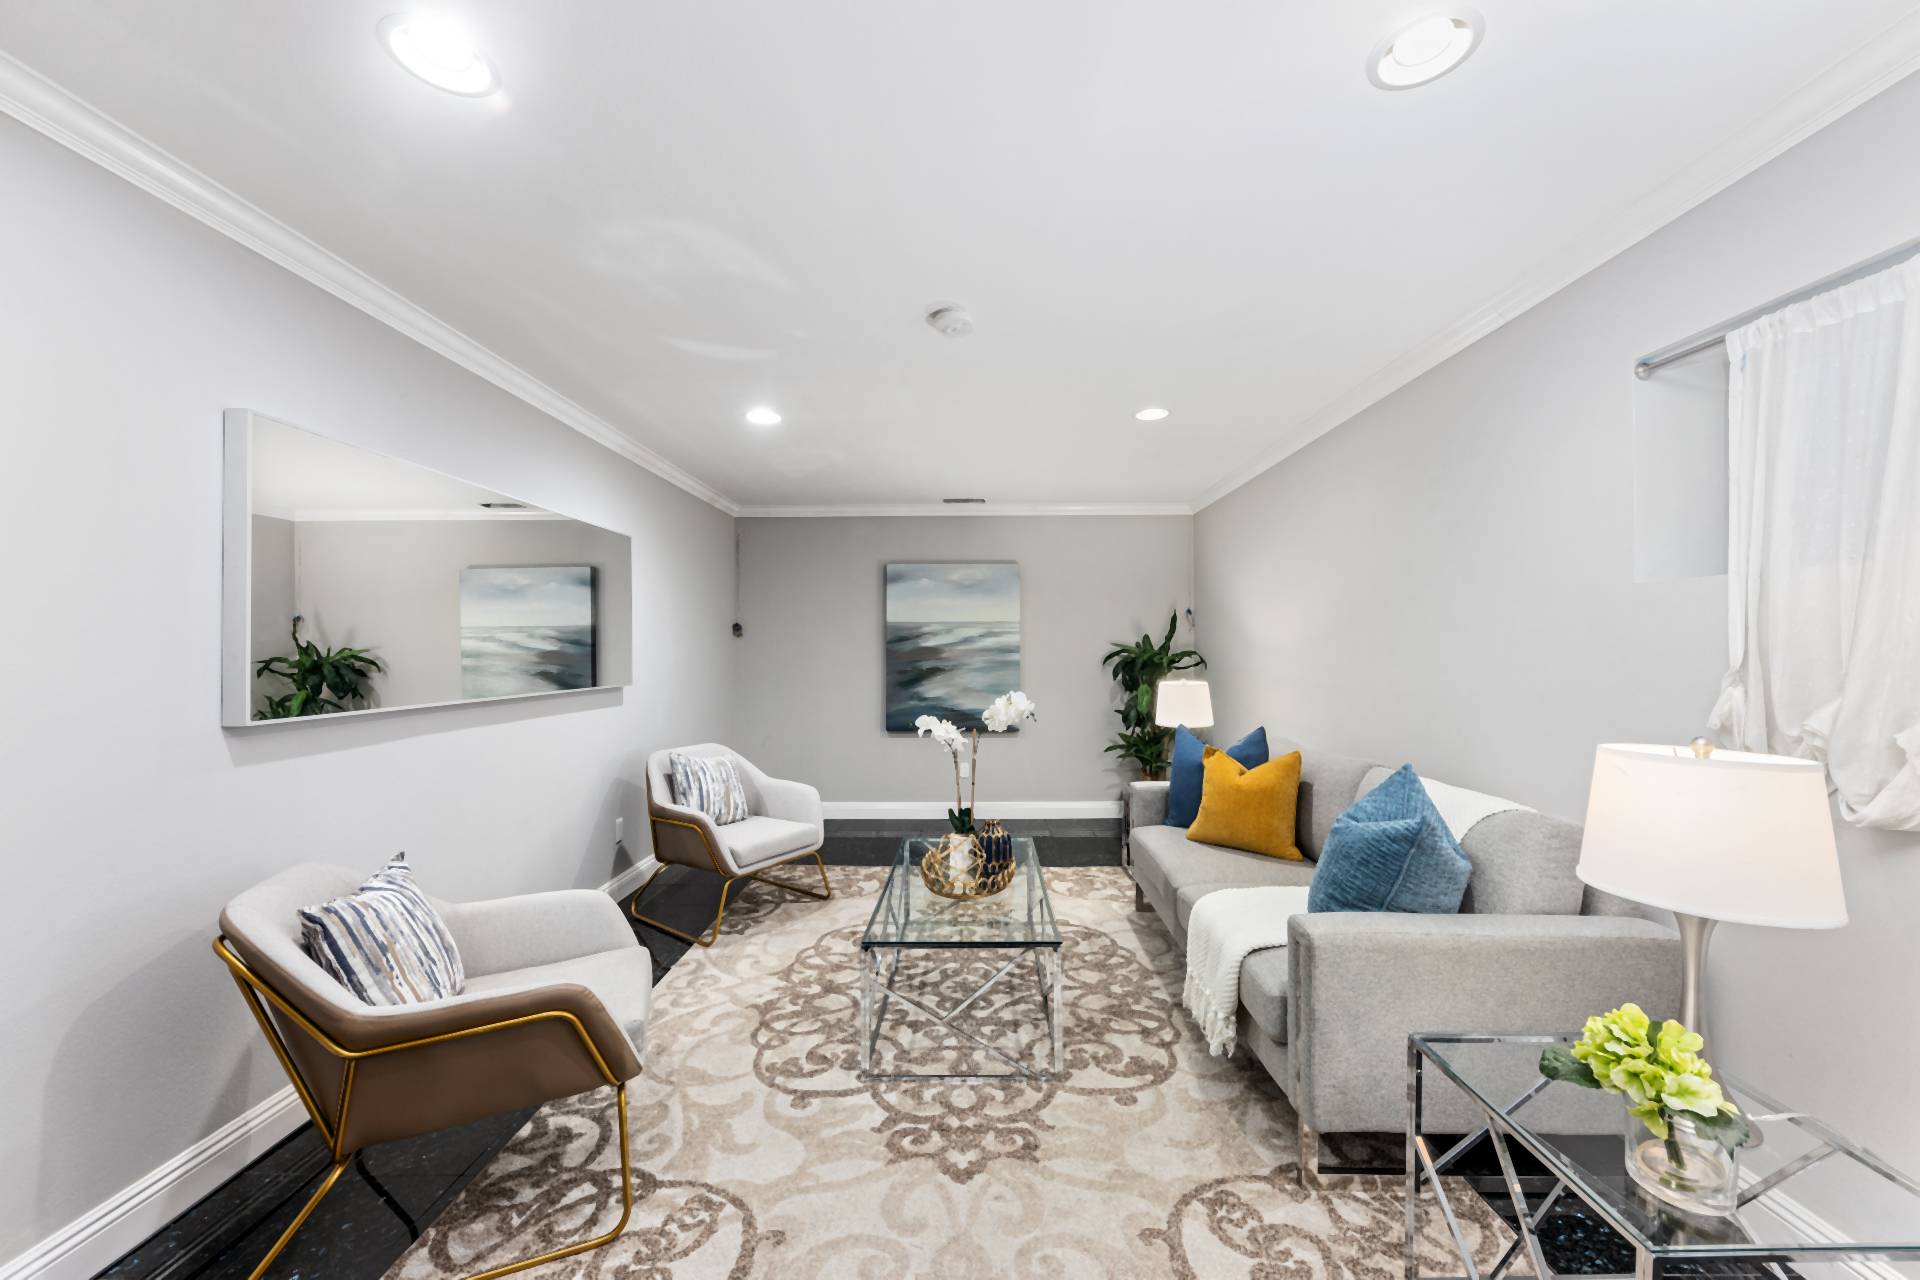 Millbrae, CA – FAQs About Model Home Staging Services from a Real Estate Stager